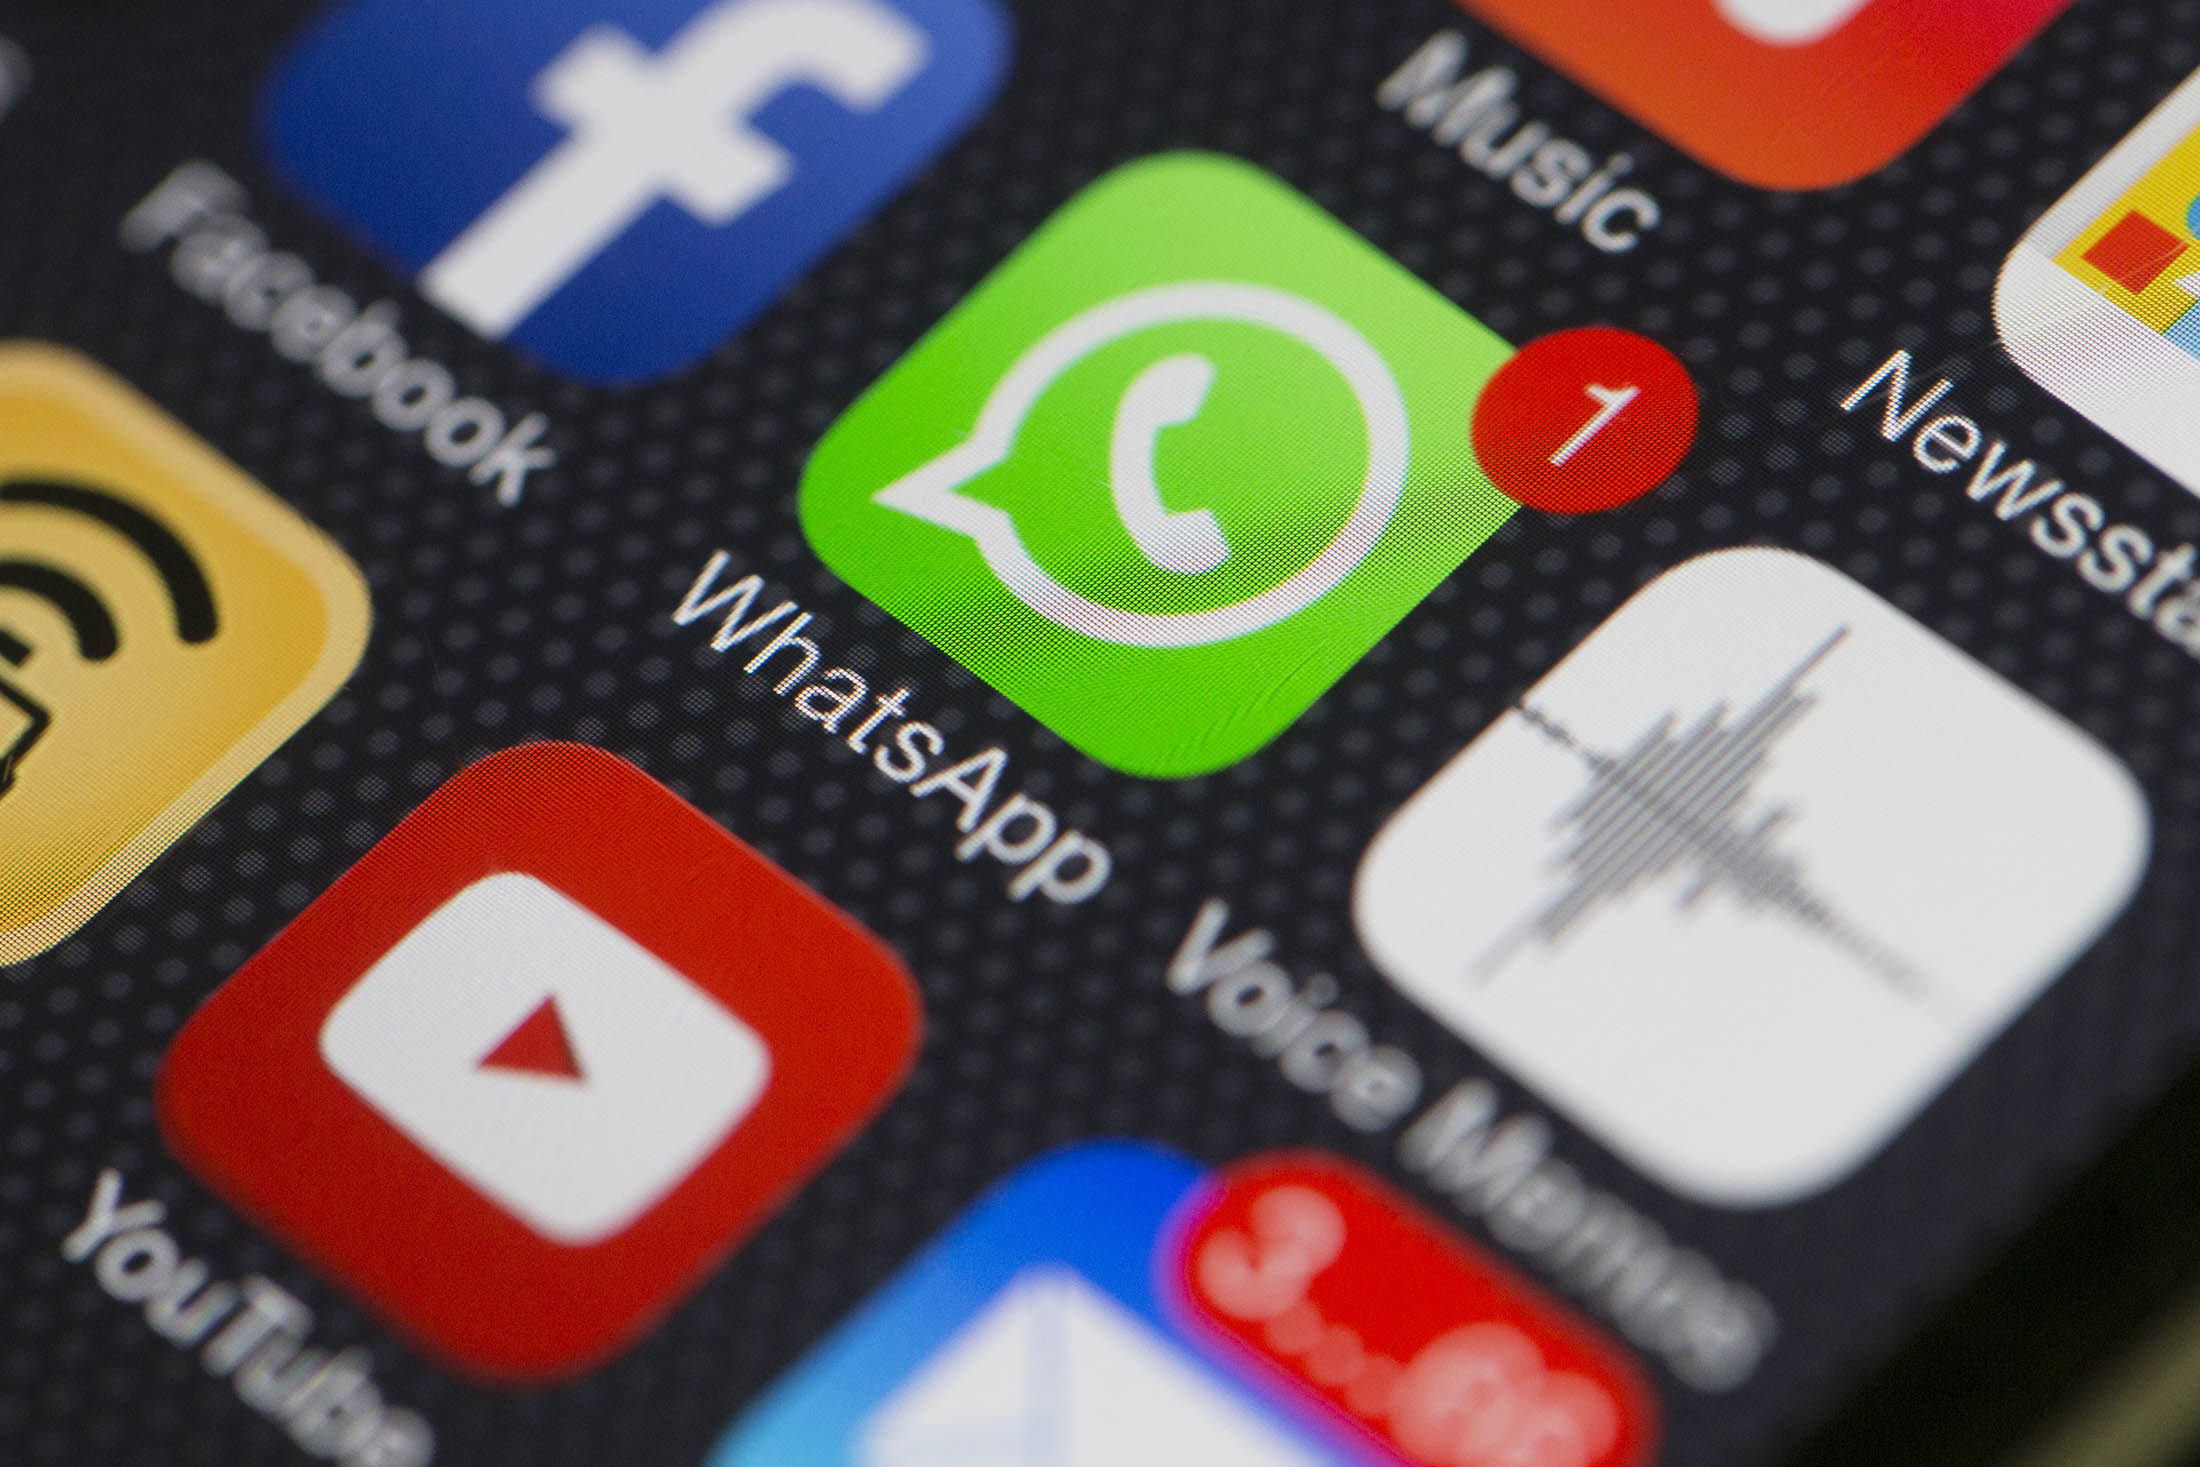 The Impact of Facebook, German WhatsApp, and Matussek Bloomberg on the Digital Landscape